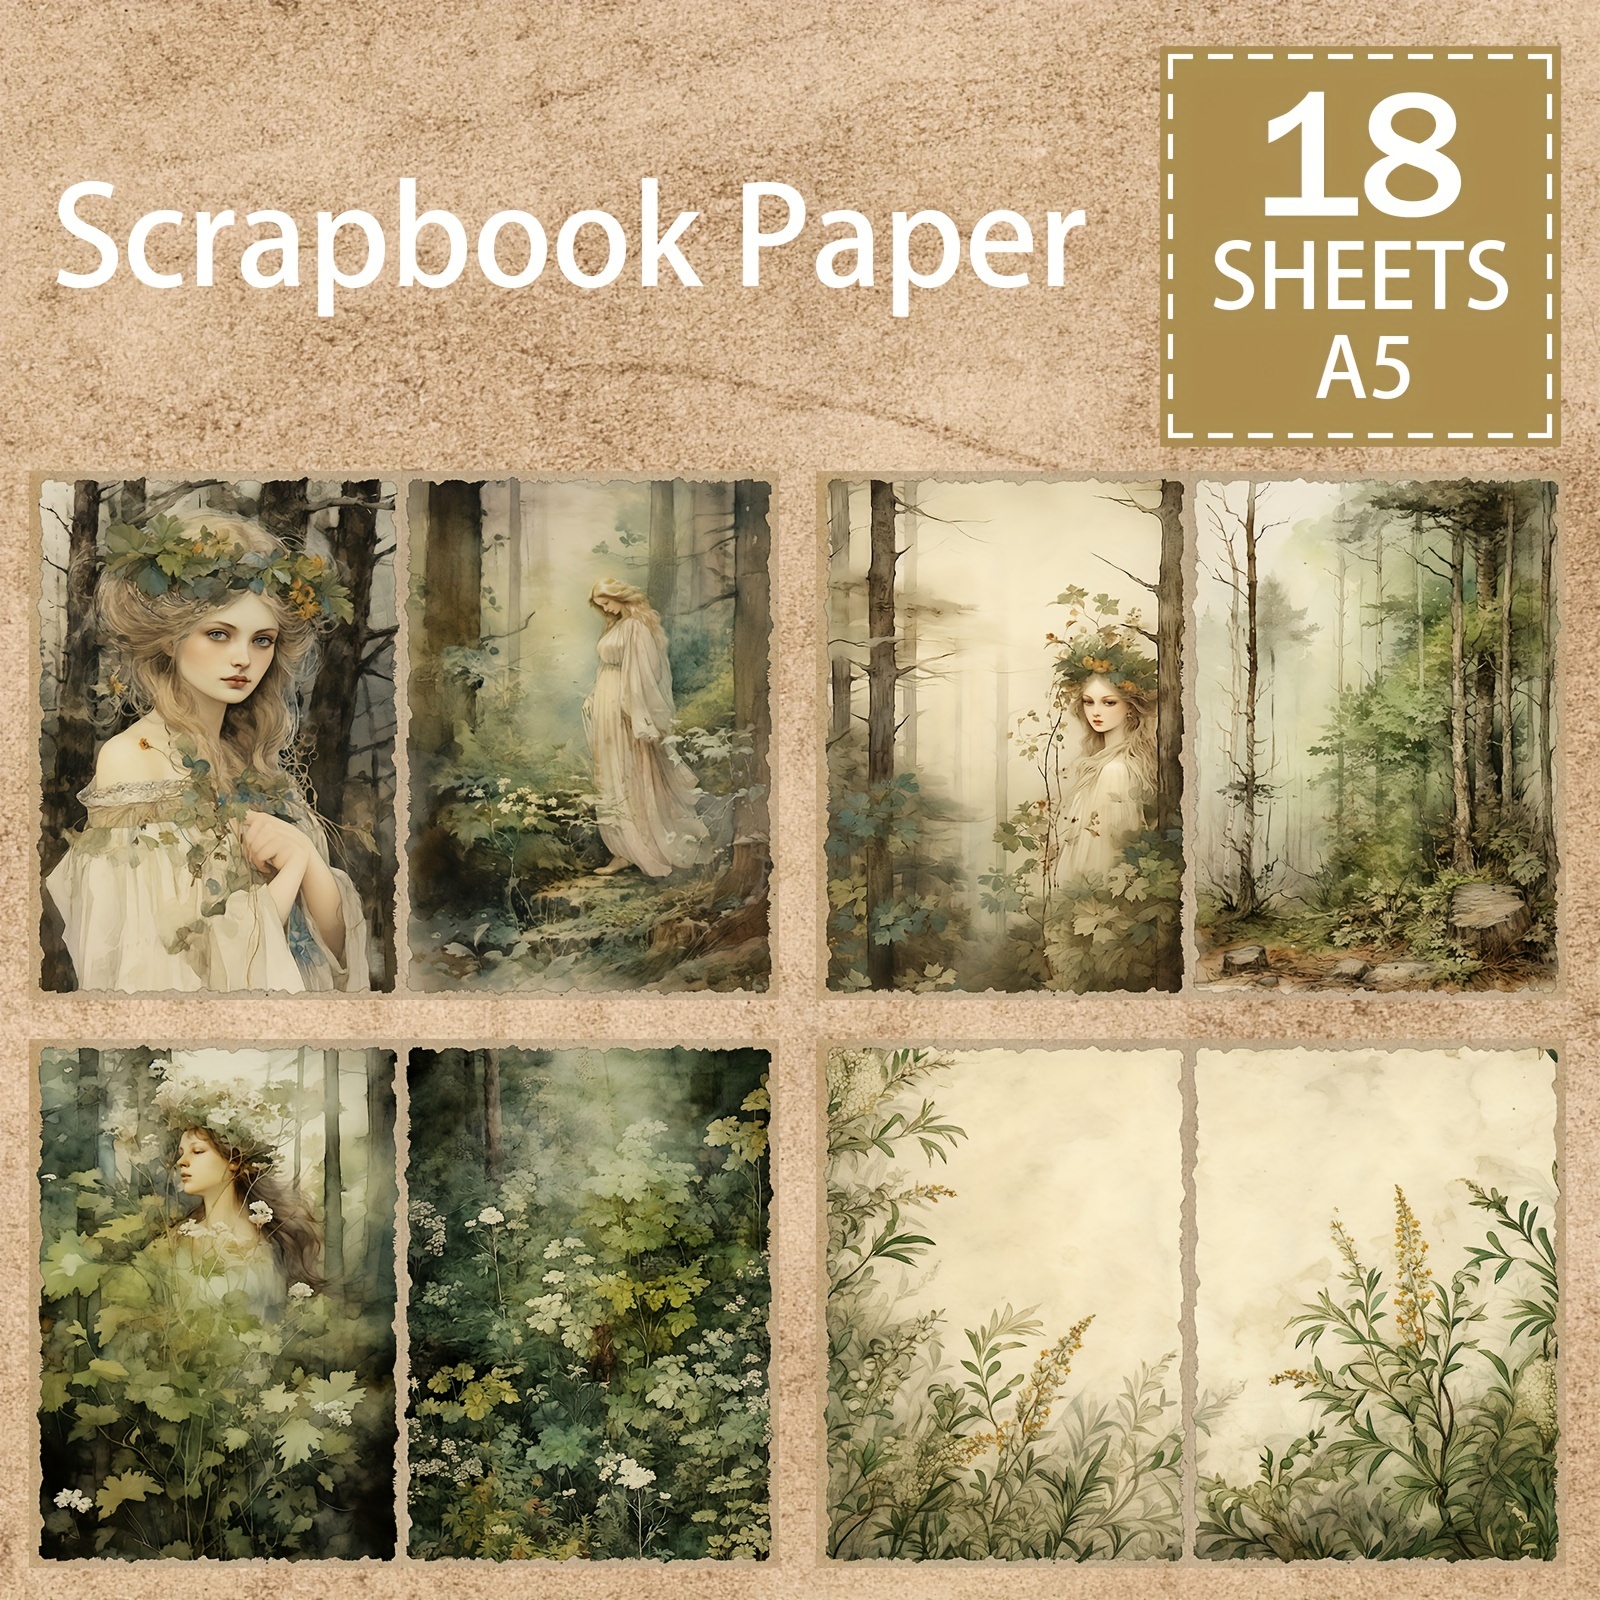 

18 Vintage Forest Illustrations On A5 Paper: Featuring A Blond Woman, Flowers, And Animals - Perfect For Diy Projects, Journals, And Card Making